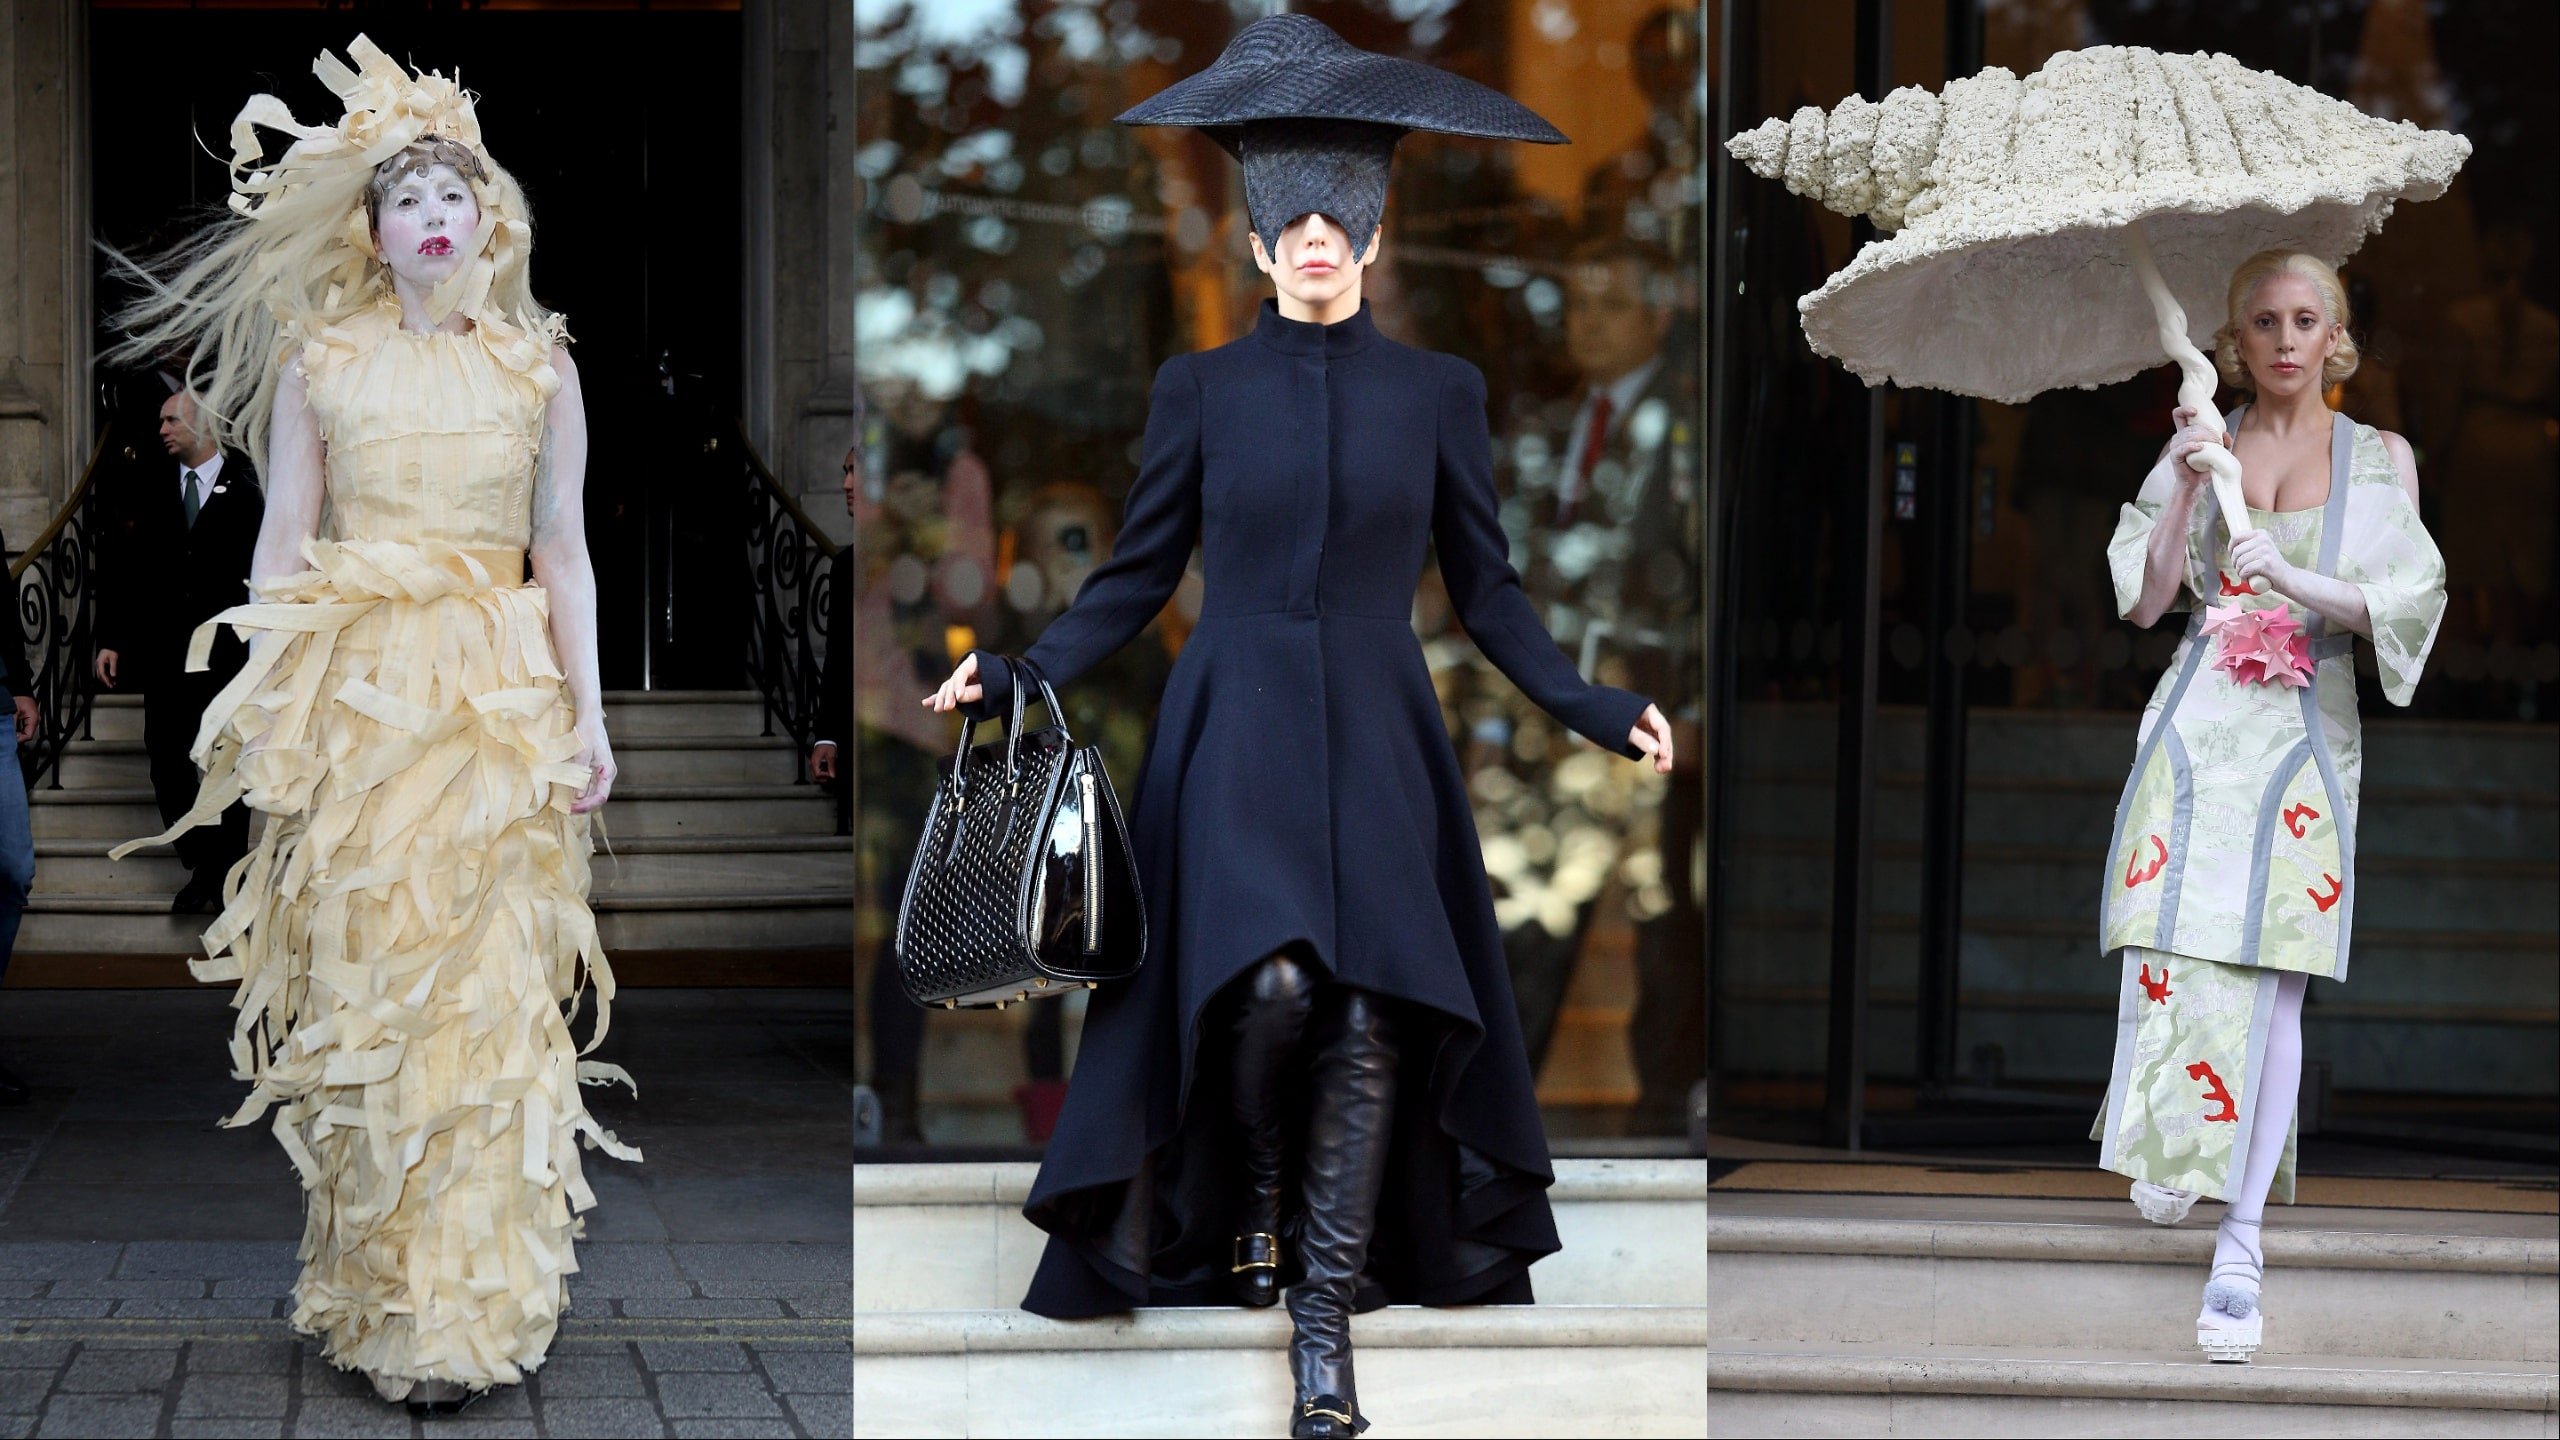 Singer Lady Gaga seen leaving her hotel wearing three different black and white outfits